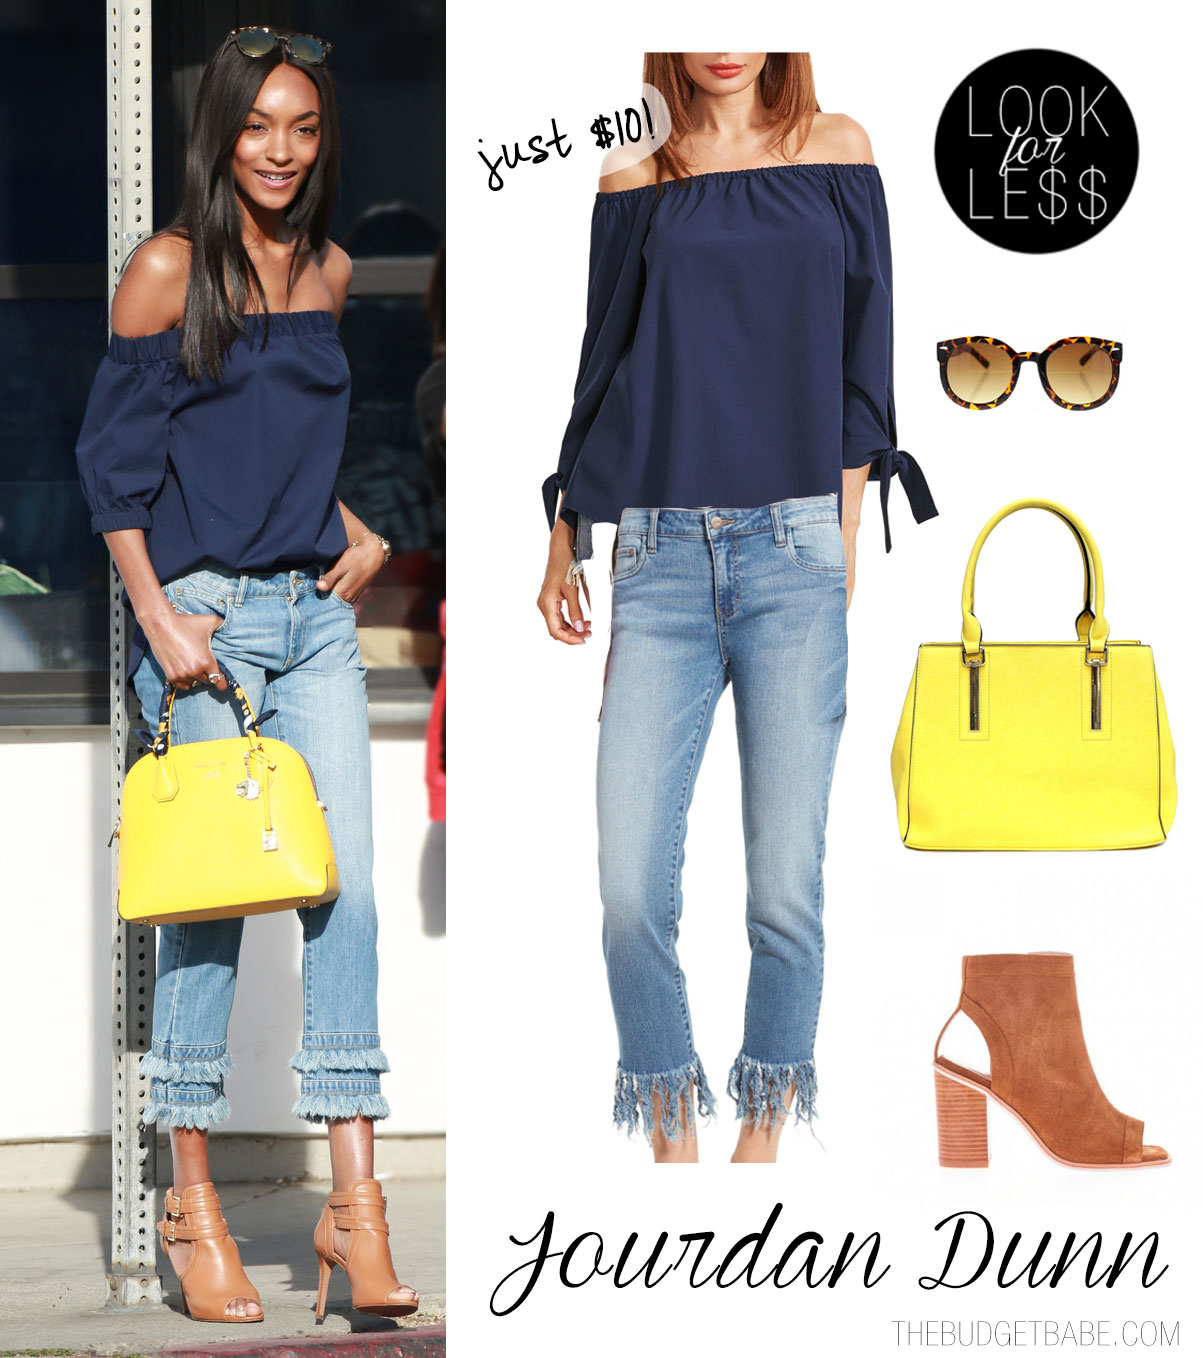 Jourdan Dunn pairs a navy off-the-shoulder top with fringe jeans and a yellow satchel.